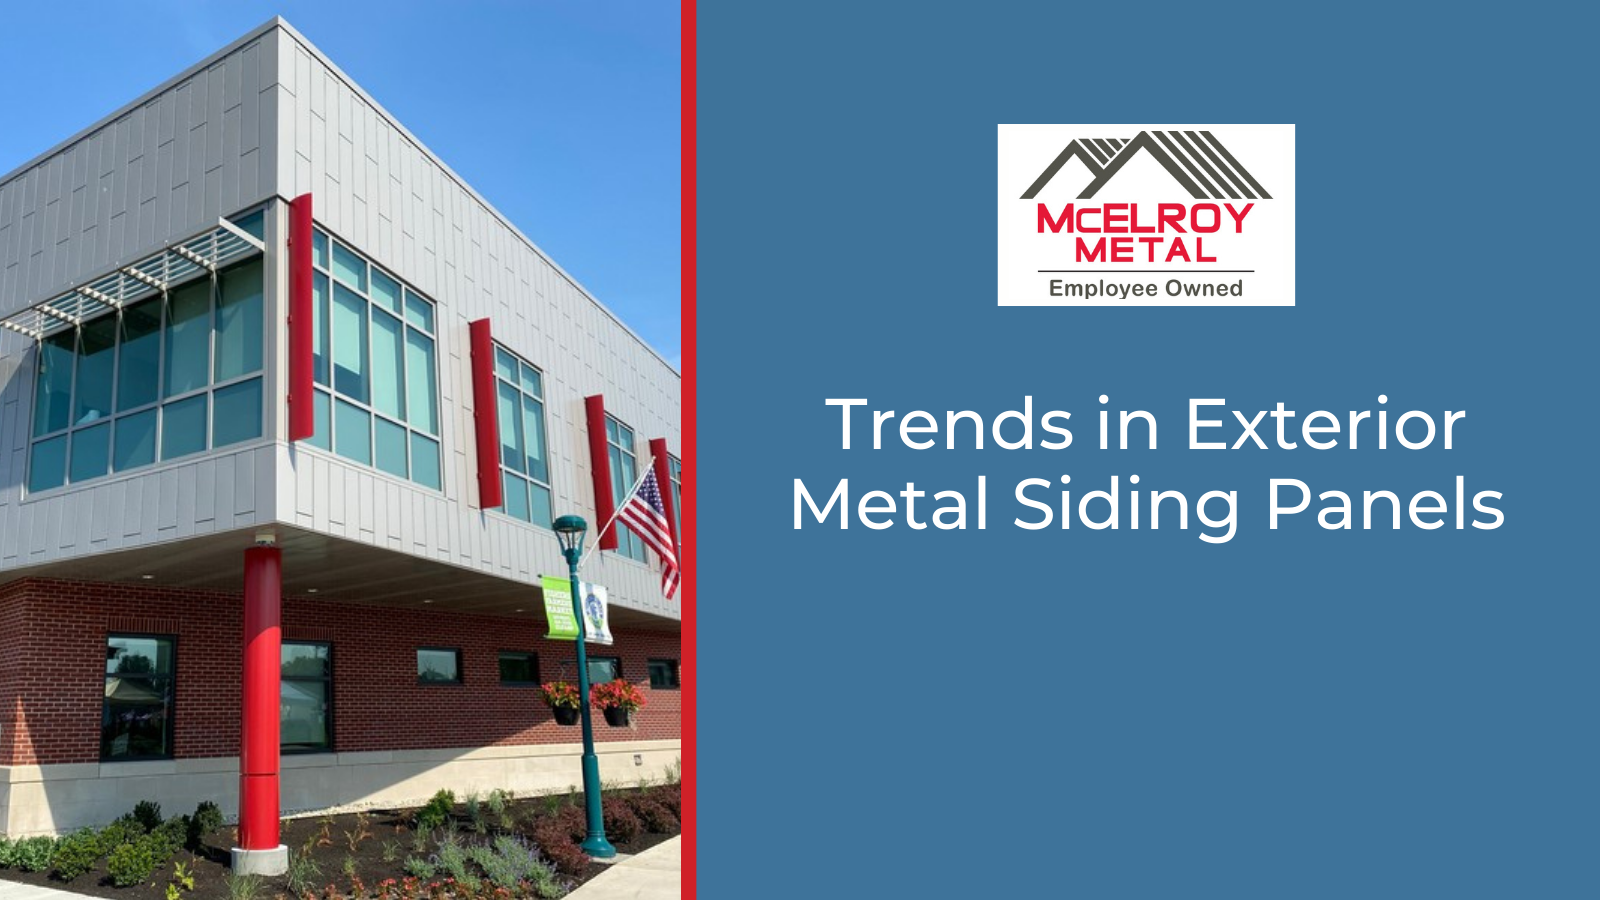 Trends in Exterior Metal Siding Panels